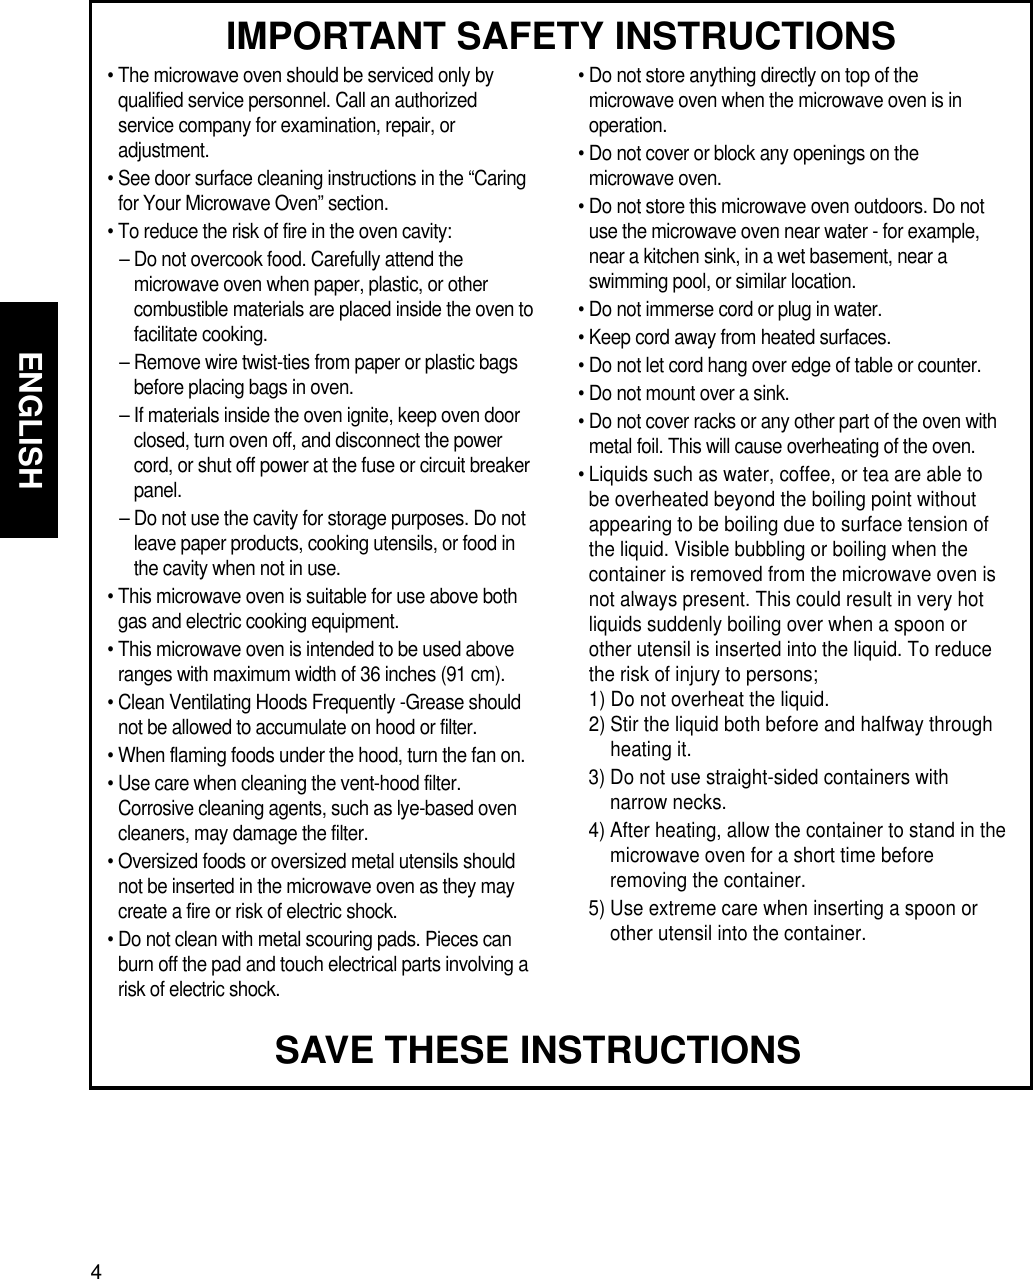 4ENGLISHMICROWAVE OVEN SAFETYIMPORTANT SAFETY INSTRUCTIONS• The microwave oven should be serviced only byqualified service personnel. Call an authorizedservice company for examination, repair, oradjustment.• See door surface cleaning instructions in the “Caringfor Your Microwave Oven” section.• To reduce the risk of fire in the oven cavity:– Do not overcook food. Carefully attend themicrowave oven when paper, plastic, or othercombustible materials are placed inside the oven tofacilitate cooking.– Remove wire twist-ties from paper or plastic bagsbefore placing bags in oven.– If materials inside the oven ignite, keep oven doorclosed, turn oven off, and disconnect the powercord, or shut off power at the fuse or circuit breakerpanel.– Do not use the cavity for storage purposes. Do notleave paper products, cooking utensils, or food inthe cavity when not in use.• This microwave oven is suitable for use above bothgas and electric cooking equipment.• This microwave oven is intended to be used aboveranges with maximum width of 36 inches (91 cm).• Clean Ventilating Hoods Frequently -Grease shouldnot be allowed to accumulate on hood or filter.• When flaming foods under the hood, turn the fan on.• Use care when cleaning the vent-hood filter.Corrosive cleaning agents, such as lye-based ovencleaners, may damage the filter.• Oversized foods or oversized metal utensils shouldnot be inserted in the microwave oven as they maycreate a fire or risk of electric shock.• Do not clean with metal scouring pads. Pieces canburn off the pad and touch electrical parts involving arisk of electric shock.• Do not store anything directly on top of themicrowave oven when the microwave oven is inoperation.• Do not cover or block any openings on themicrowave oven.• Do not store this microwave oven outdoors. Do notuse the microwave oven near water - for example,near a kitchen sink, in a wet basement, near aswimming pool, or similar location.• Do not immerse cord or plug in water.• Keep cord away from heated surfaces.• Do not let cord hang over edge of table or counter.• Do not mount over a sink.• Do not cover racks or any other part of the oven withmetal foil. This will cause overheating of the oven.• Liquids such as water, coffee, or tea are able tobe overheated beyond the boiling point withoutappearing to be boiling due to surface tension ofthe liquid. Visible bubbling or boiling when thecontainer is removed from the microwave oven isnot always present. This could result in very hotliquids suddenly boiling over when a spoon orother utensil is inserted into the liquid. To reducethe risk of injury to persons; 1) Do not overheat the liquid.  2) Stir the liquid both before and halfway throughheating it. 3) Do not use straight-sided containers withnarrow necks. 4) After heating, allow the container to stand in themicrowave oven for a short time beforeremoving the container. 5) Use extreme care when inserting a spoon orother utensil into the container.SAVE THESE INSTRUCTIONS